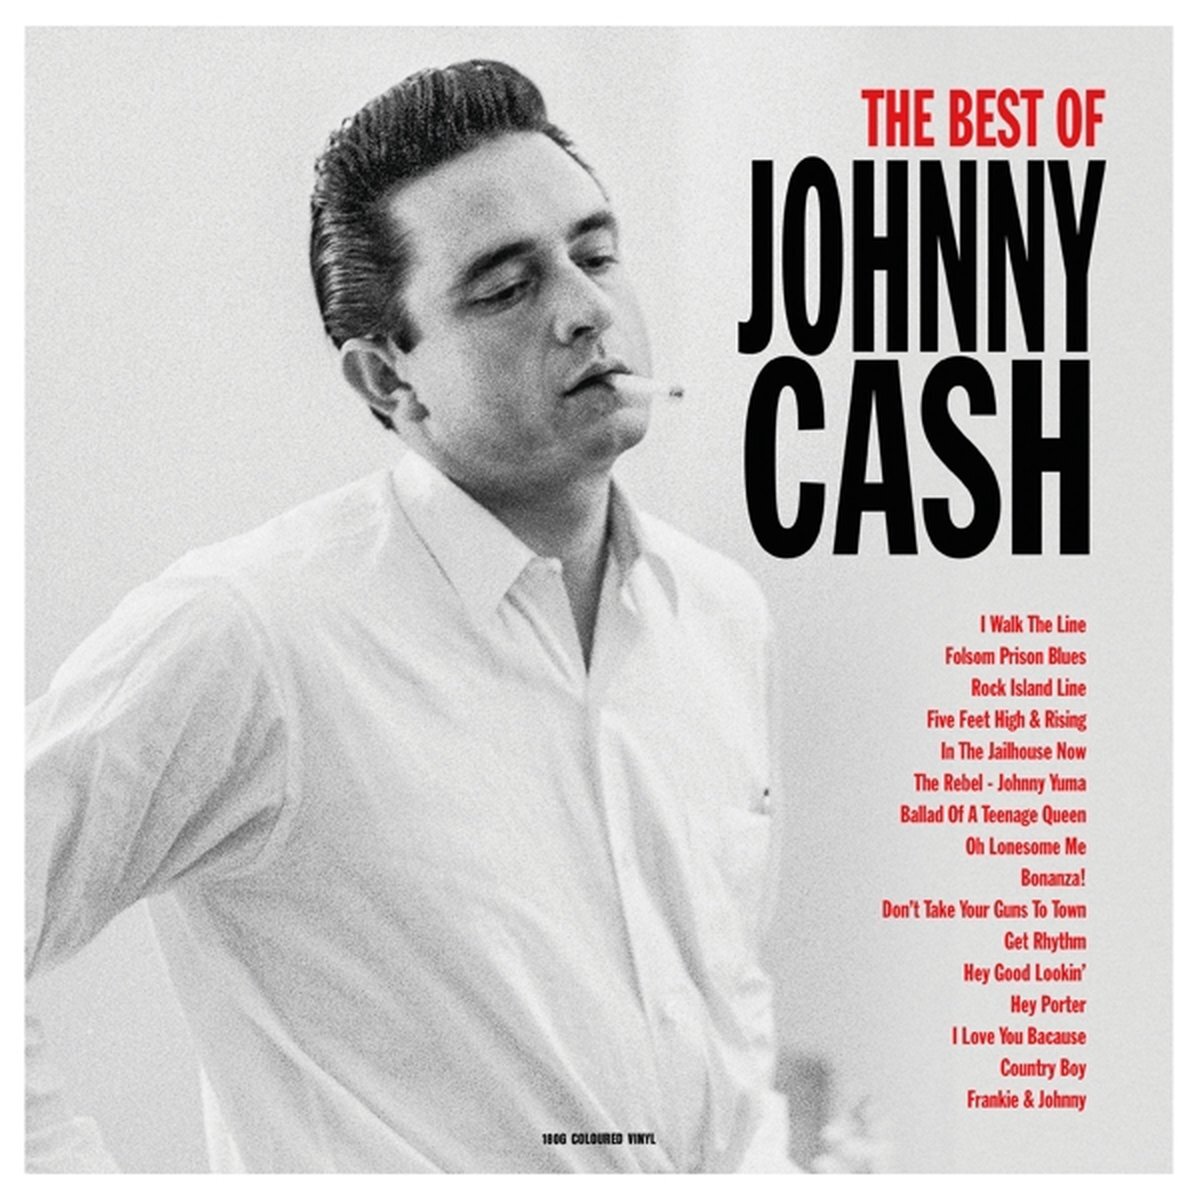 NOT NOW The Best of Johnny Cash